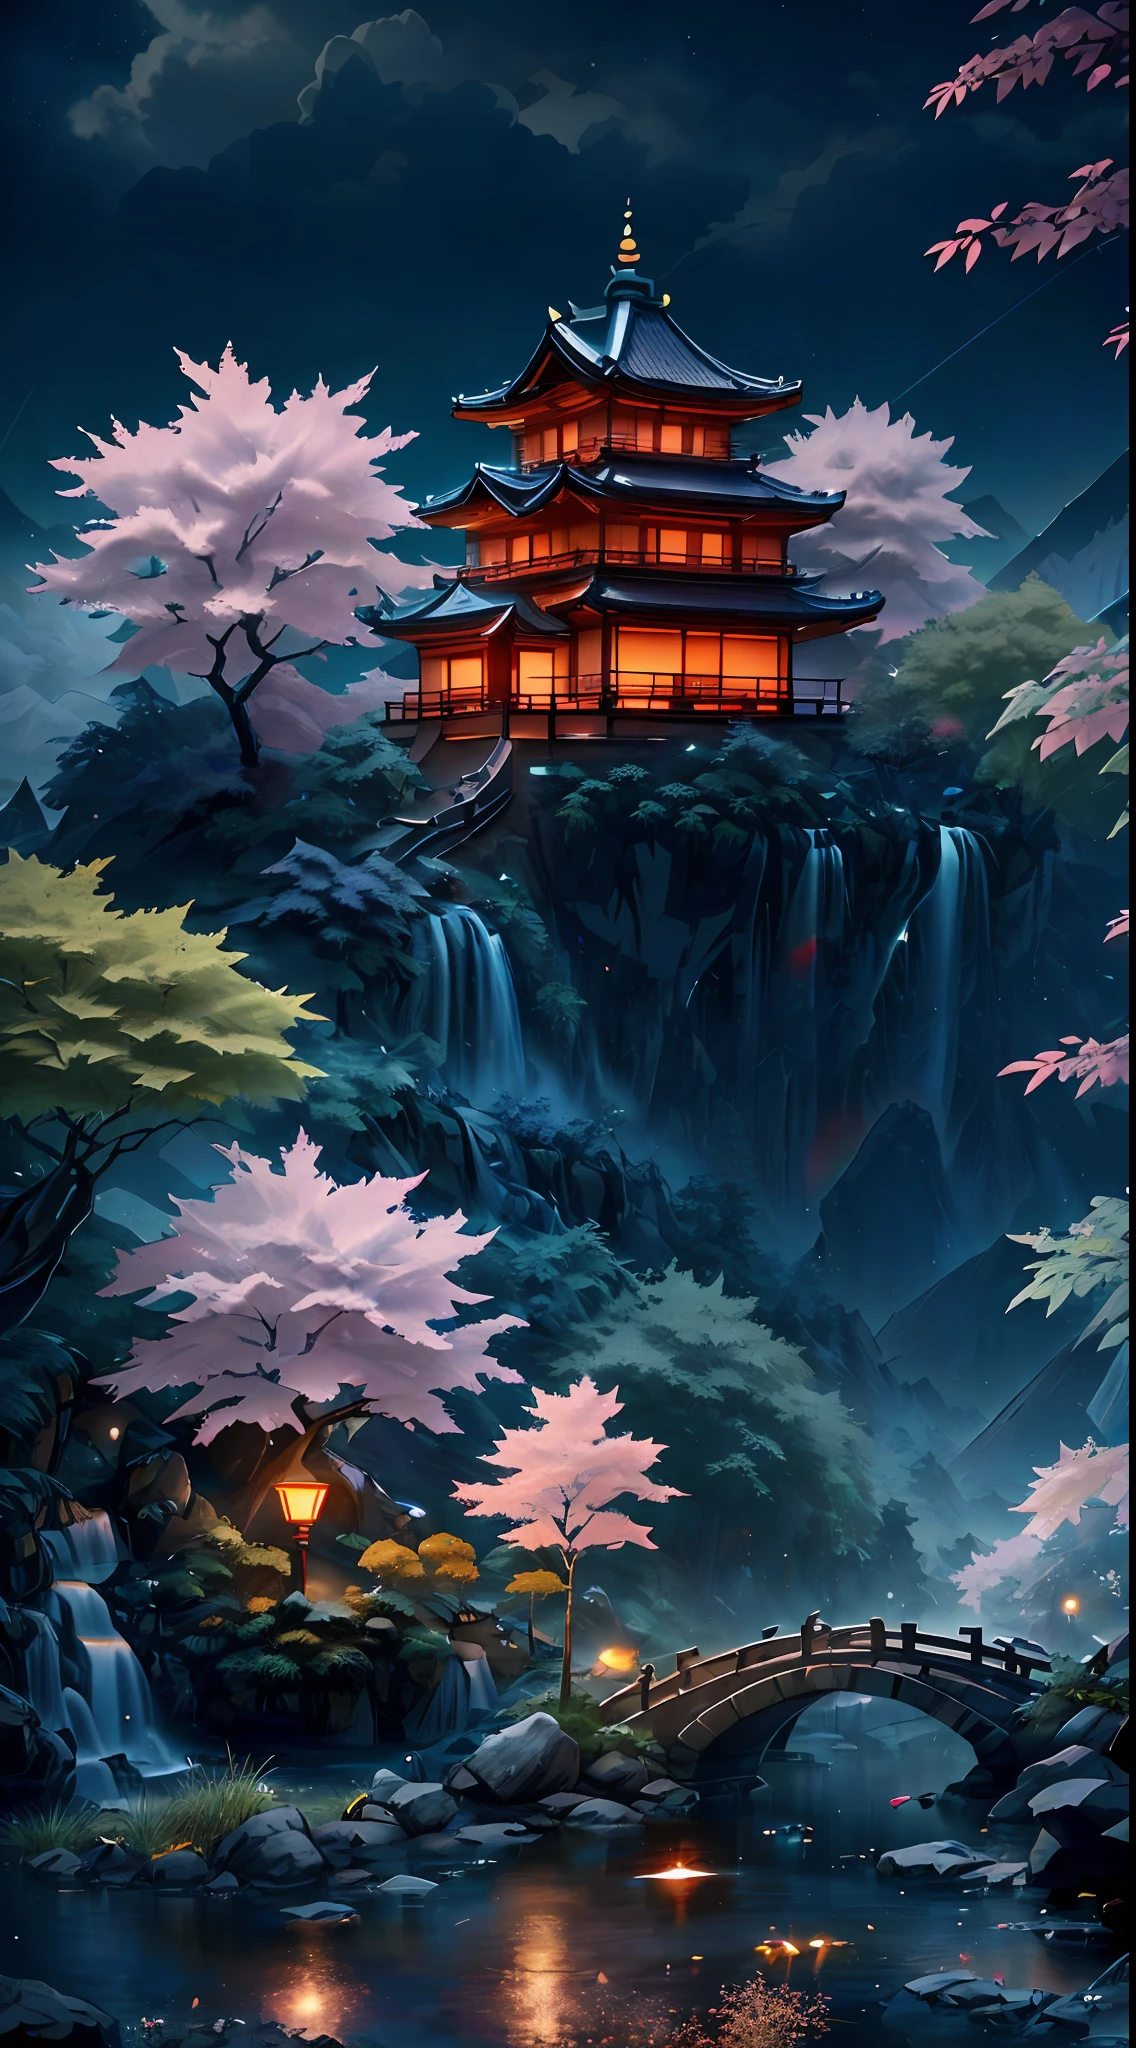 ((diffuse colors)), (( Top view, high angle view, Focal point composition)), Ancient Chinese architecture, cool colors, dark night, moon, garden, bamboo, lake, stone bridge, rockery, arch, corner, tree, running water, landscape, outdoor, waterfall, grass, rock, intense rainfall, thunderstorm, vines all around, giant and wet trees, with glowing leaves in the trees, glowing fireflies and glowing particle effects, a japanese castle at the top of a mountain, masterpiece, best quality, high quality, extremely detailed CG unity 8k wallpaper, oil paiting, award winning photography, Bokeh, Depth of Field, HDR, bloom, ,Photorealistic,extremely detailed, trending on artstation, trending on CGsociety, Intricate, High Detail, dramatic, art by midjourney, volumetric lighting